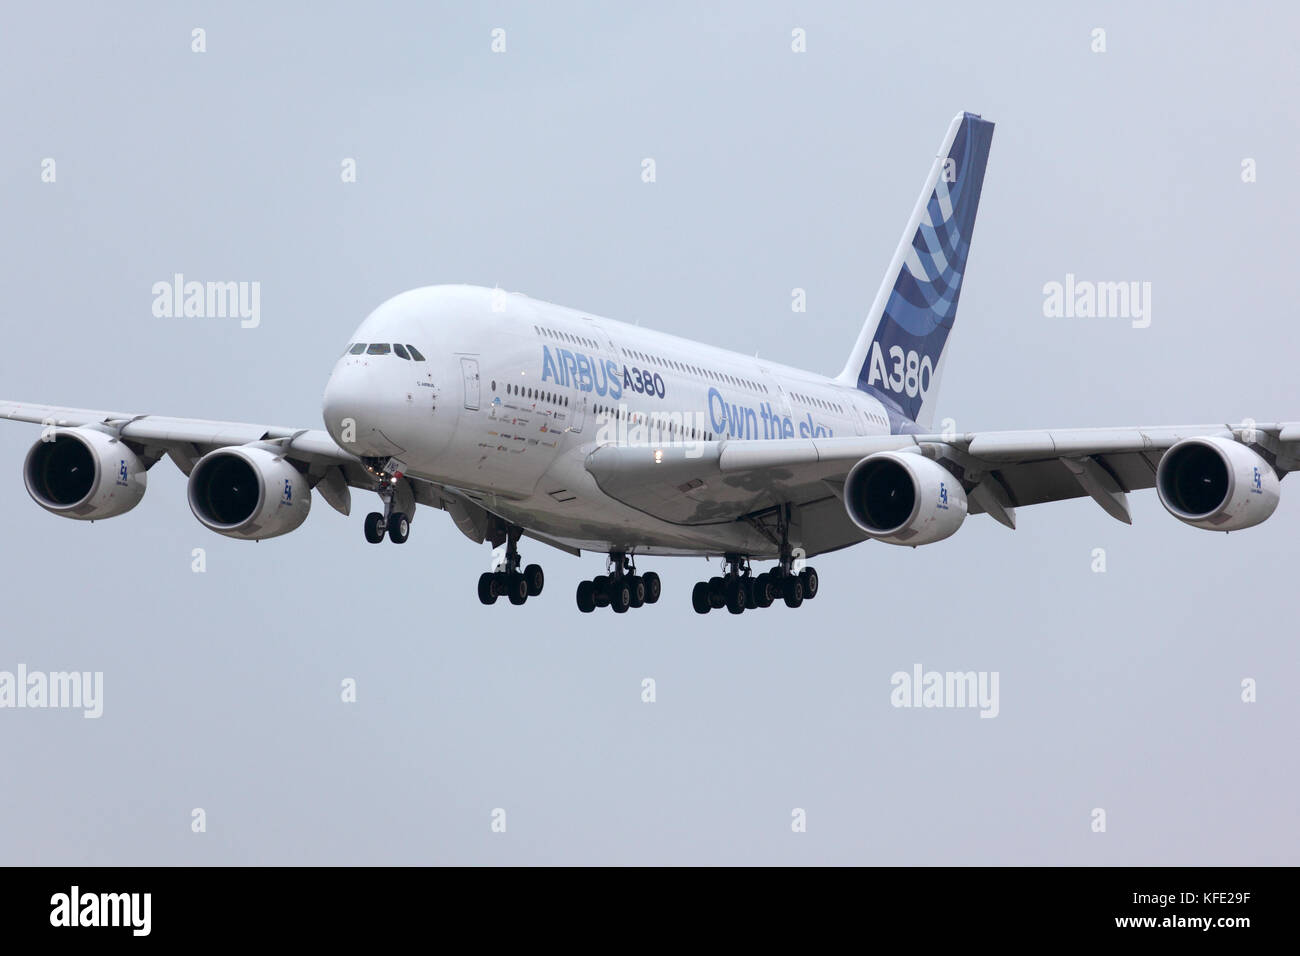 Zhukovsky, Moscow Region, Russia - August 30, 2013: Airbus Industrie A380 F-WWDD modern civil airliner landing after a demo flight in Zhukovsky during Stock Photo